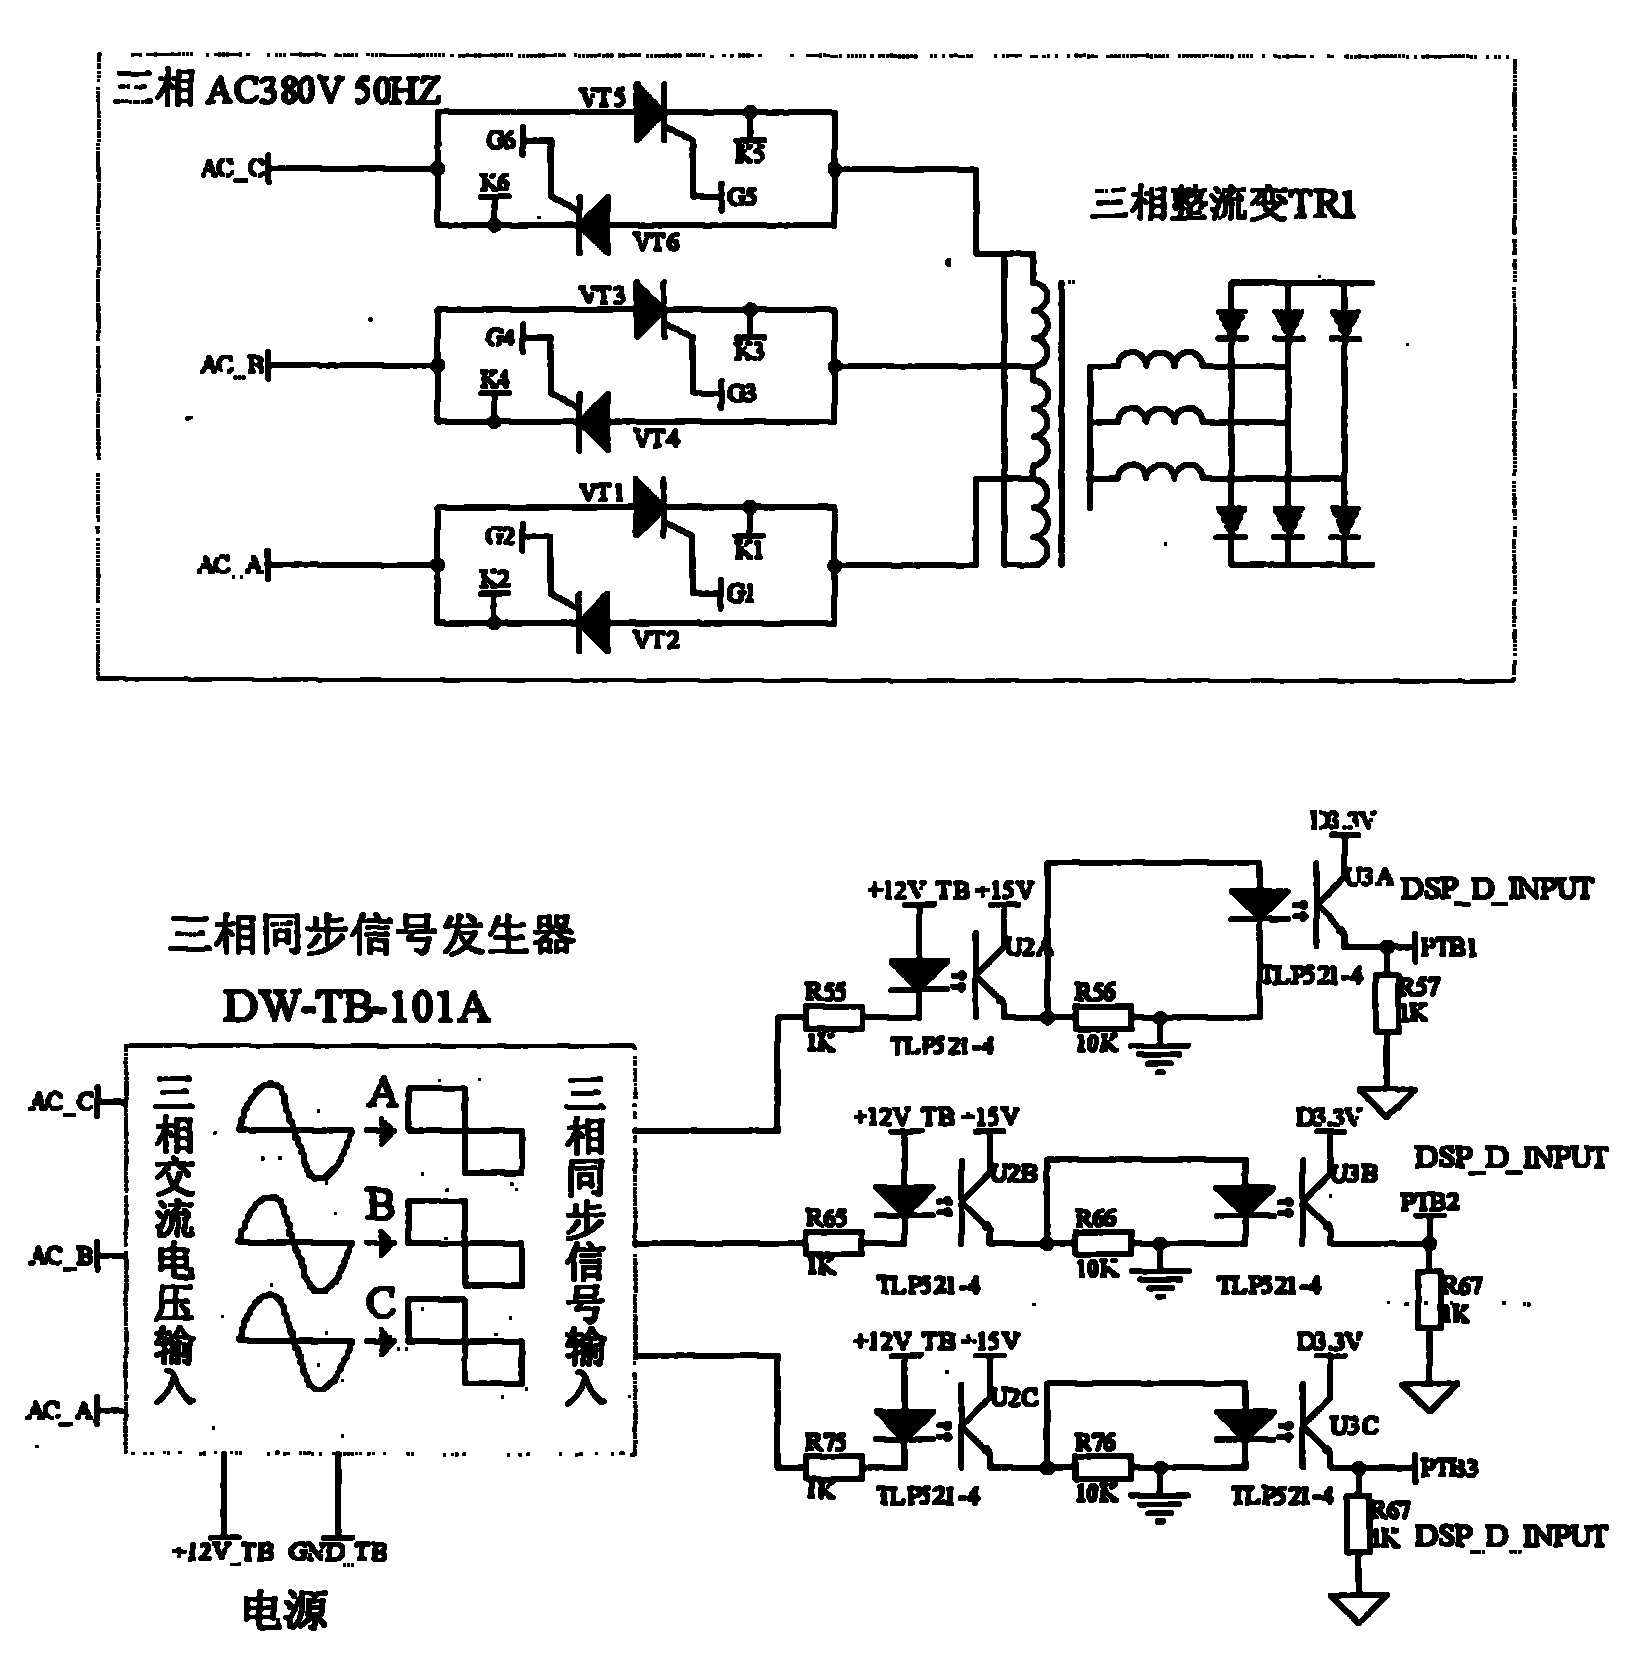 Digital signal processor (DSP) embedded controller for electric dust-removing three-phase high-voltage direct-current power supply